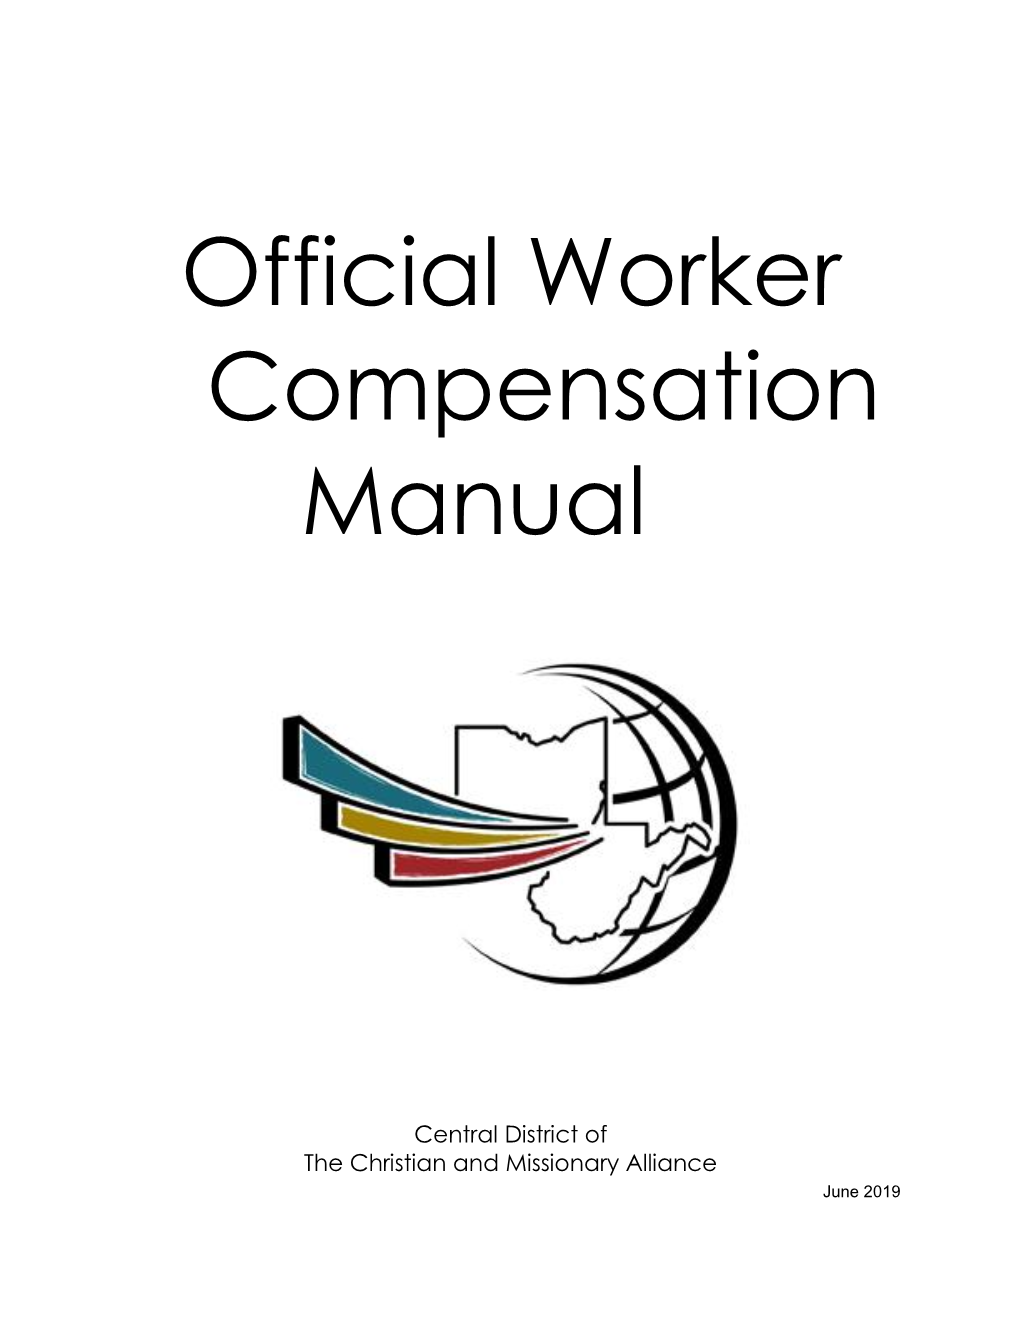 Official Worker Compensation Manual Has Come from a Wide Variety of Sources